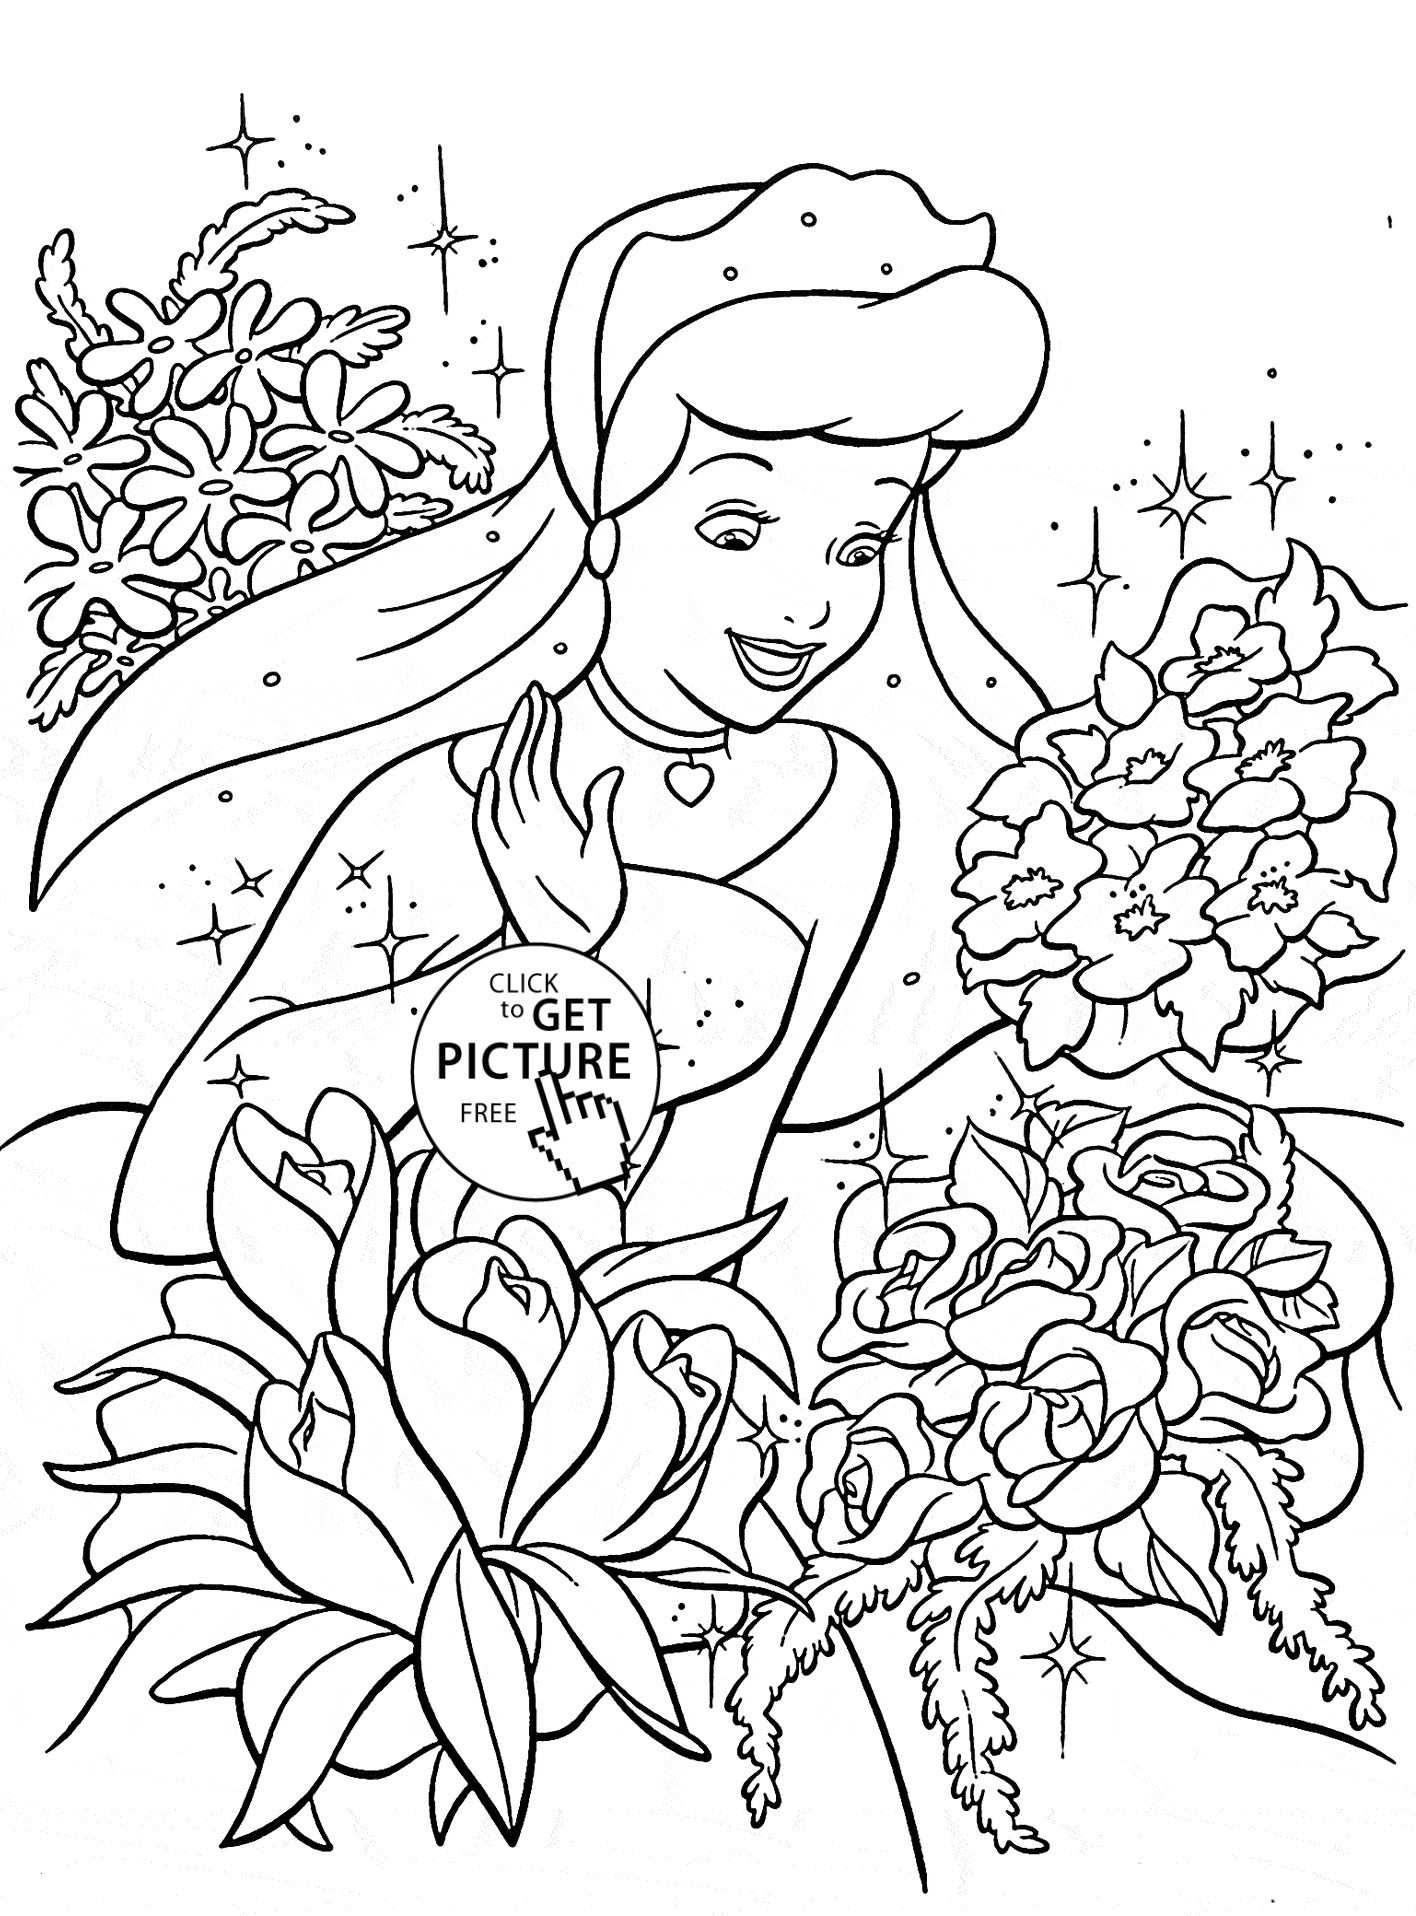 Printable Princess Coloring Page Lovable Free Printable Princess Coloring Pages Awesome New Dress Up Coloring